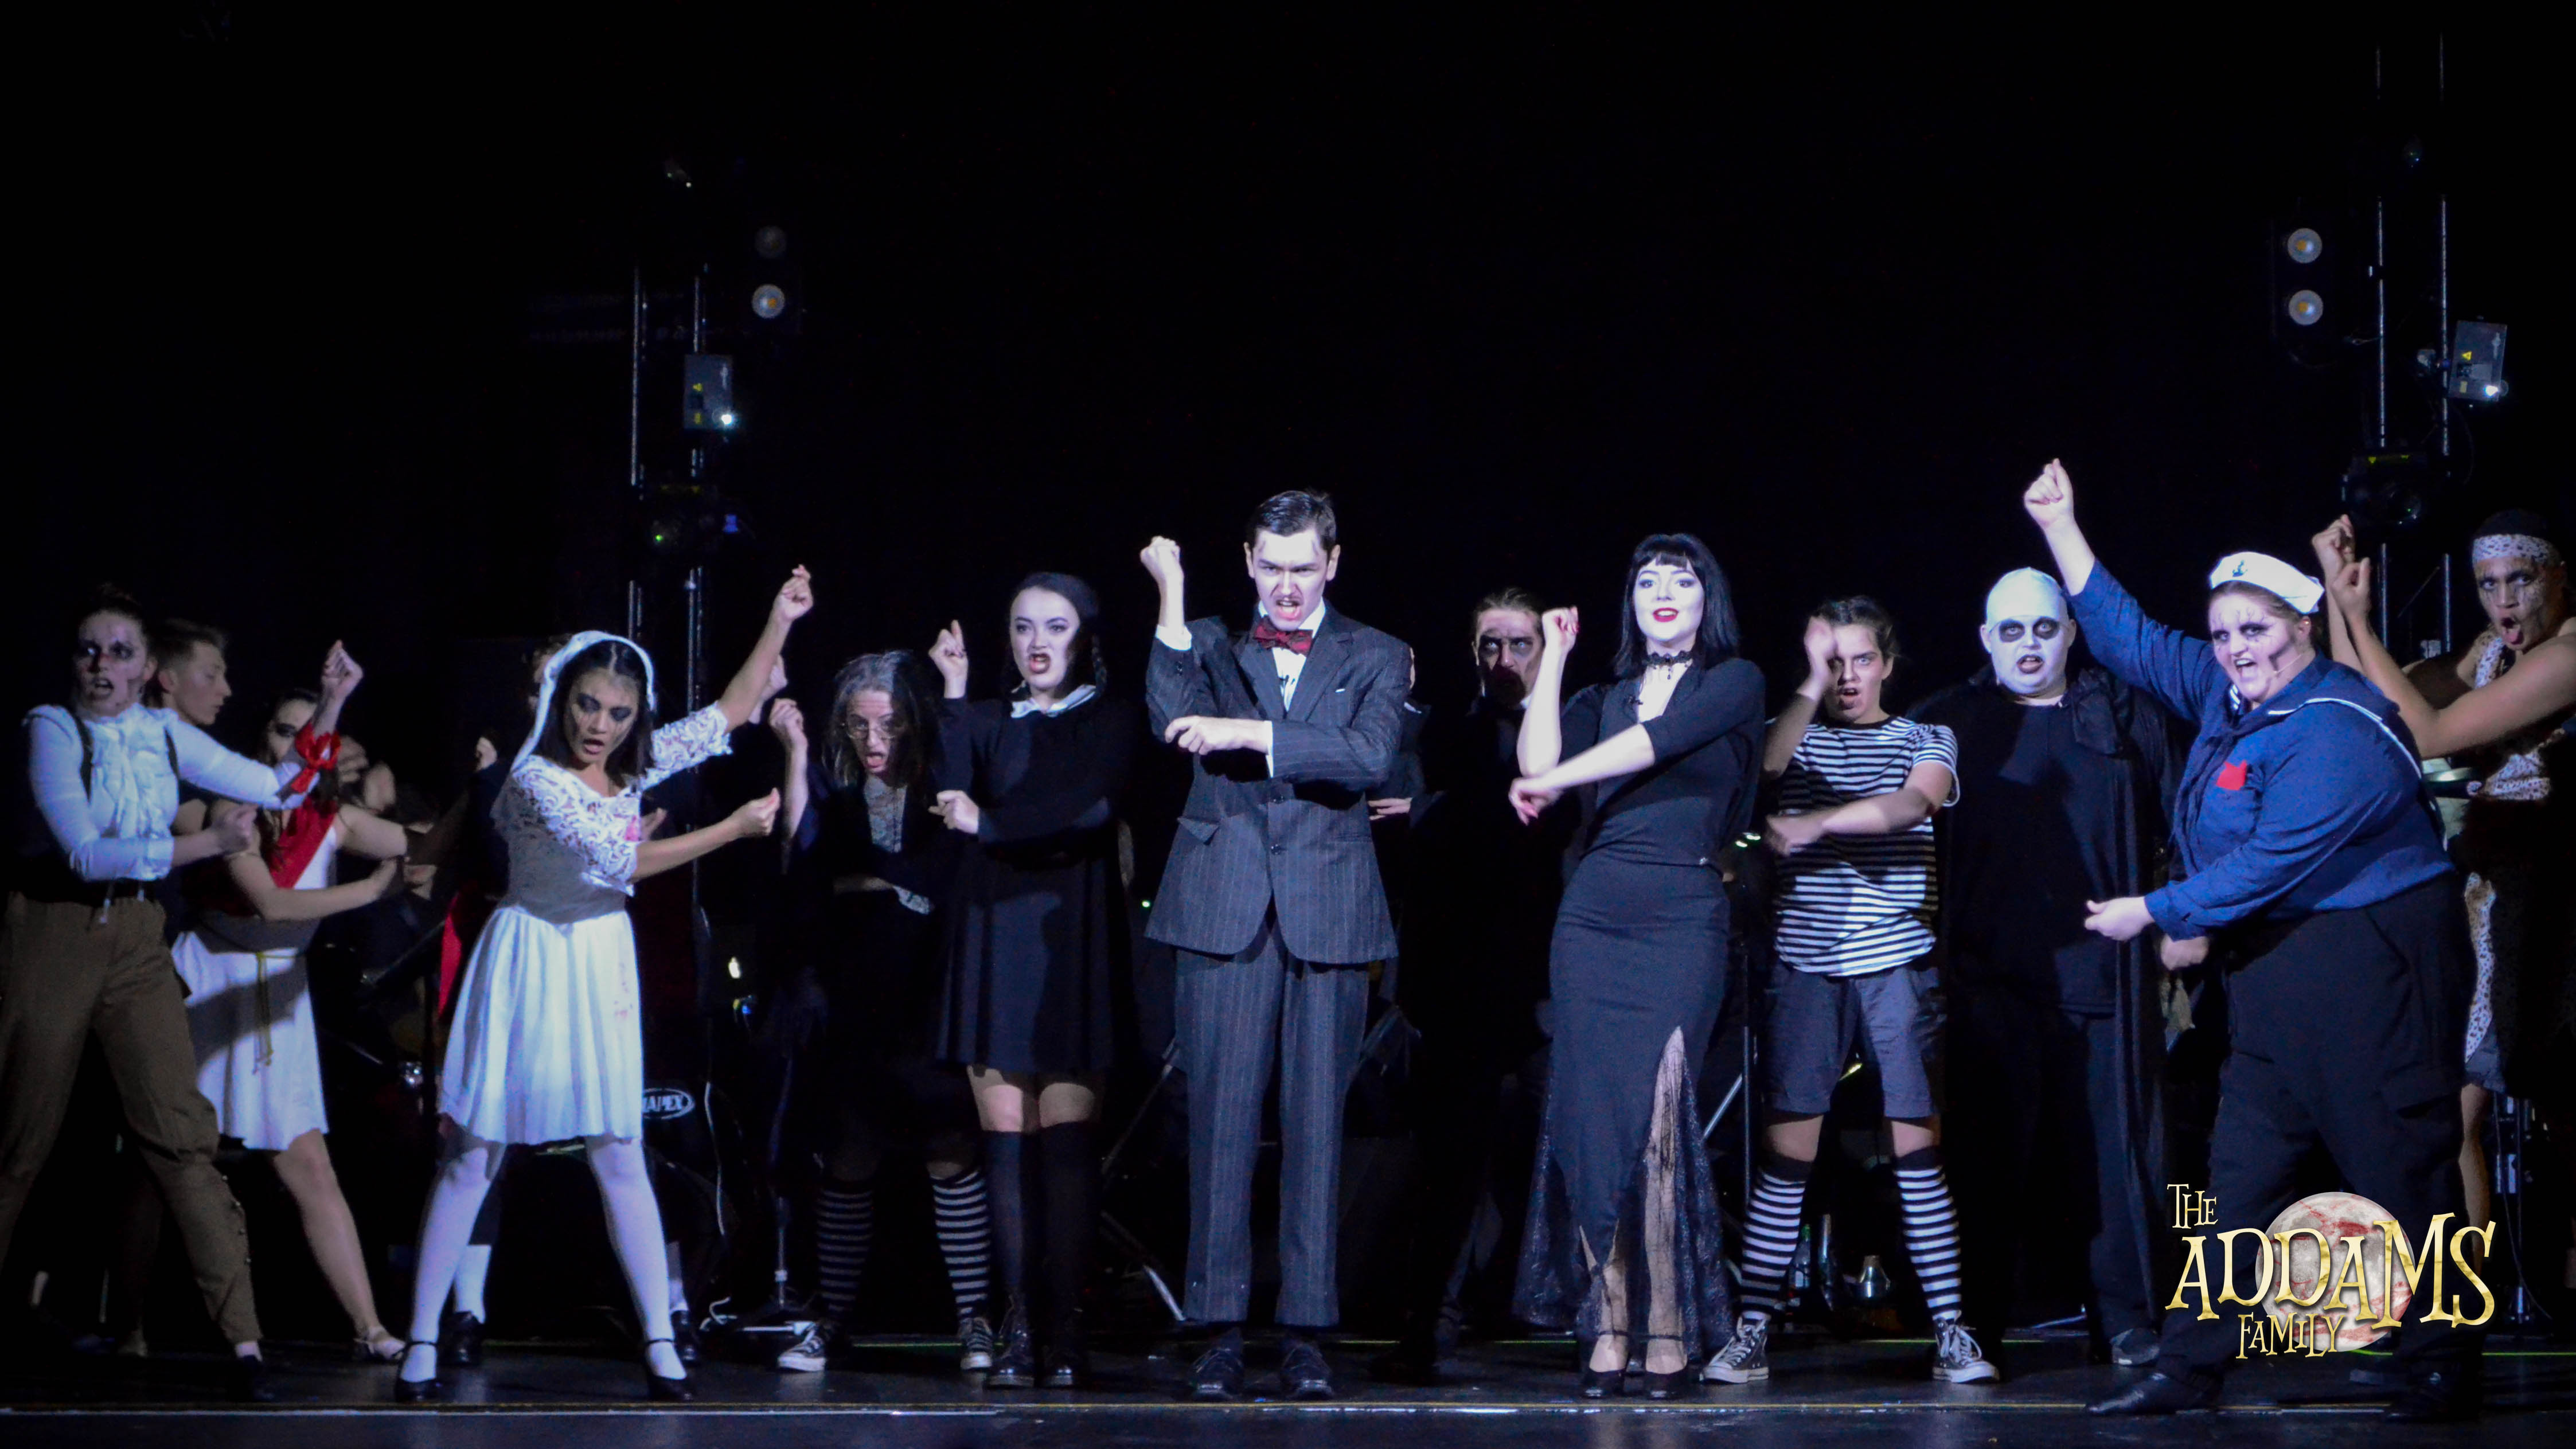 Full Disclosure: The Addams Family Musical